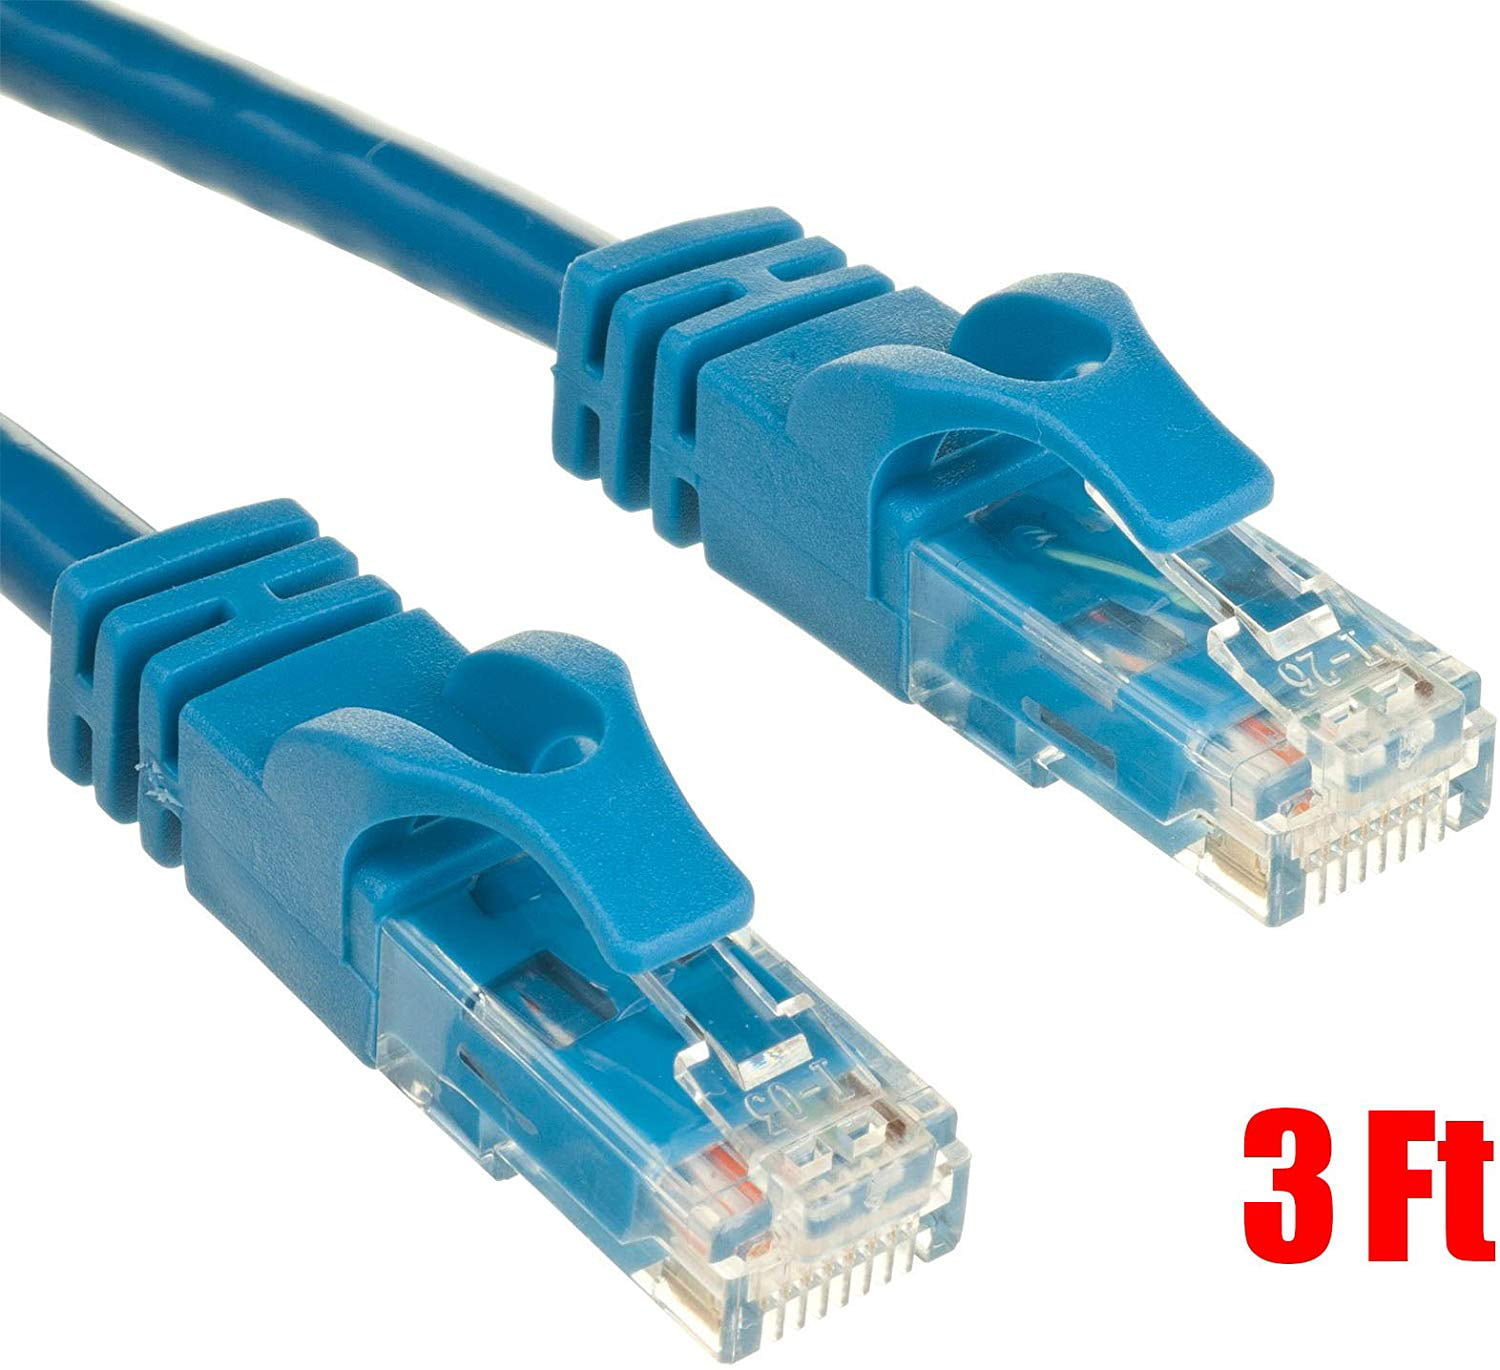 3ft CAT6 Ethernet Network LAN Router Patch Cable Cord Wire Blue 50 Pack Lot 